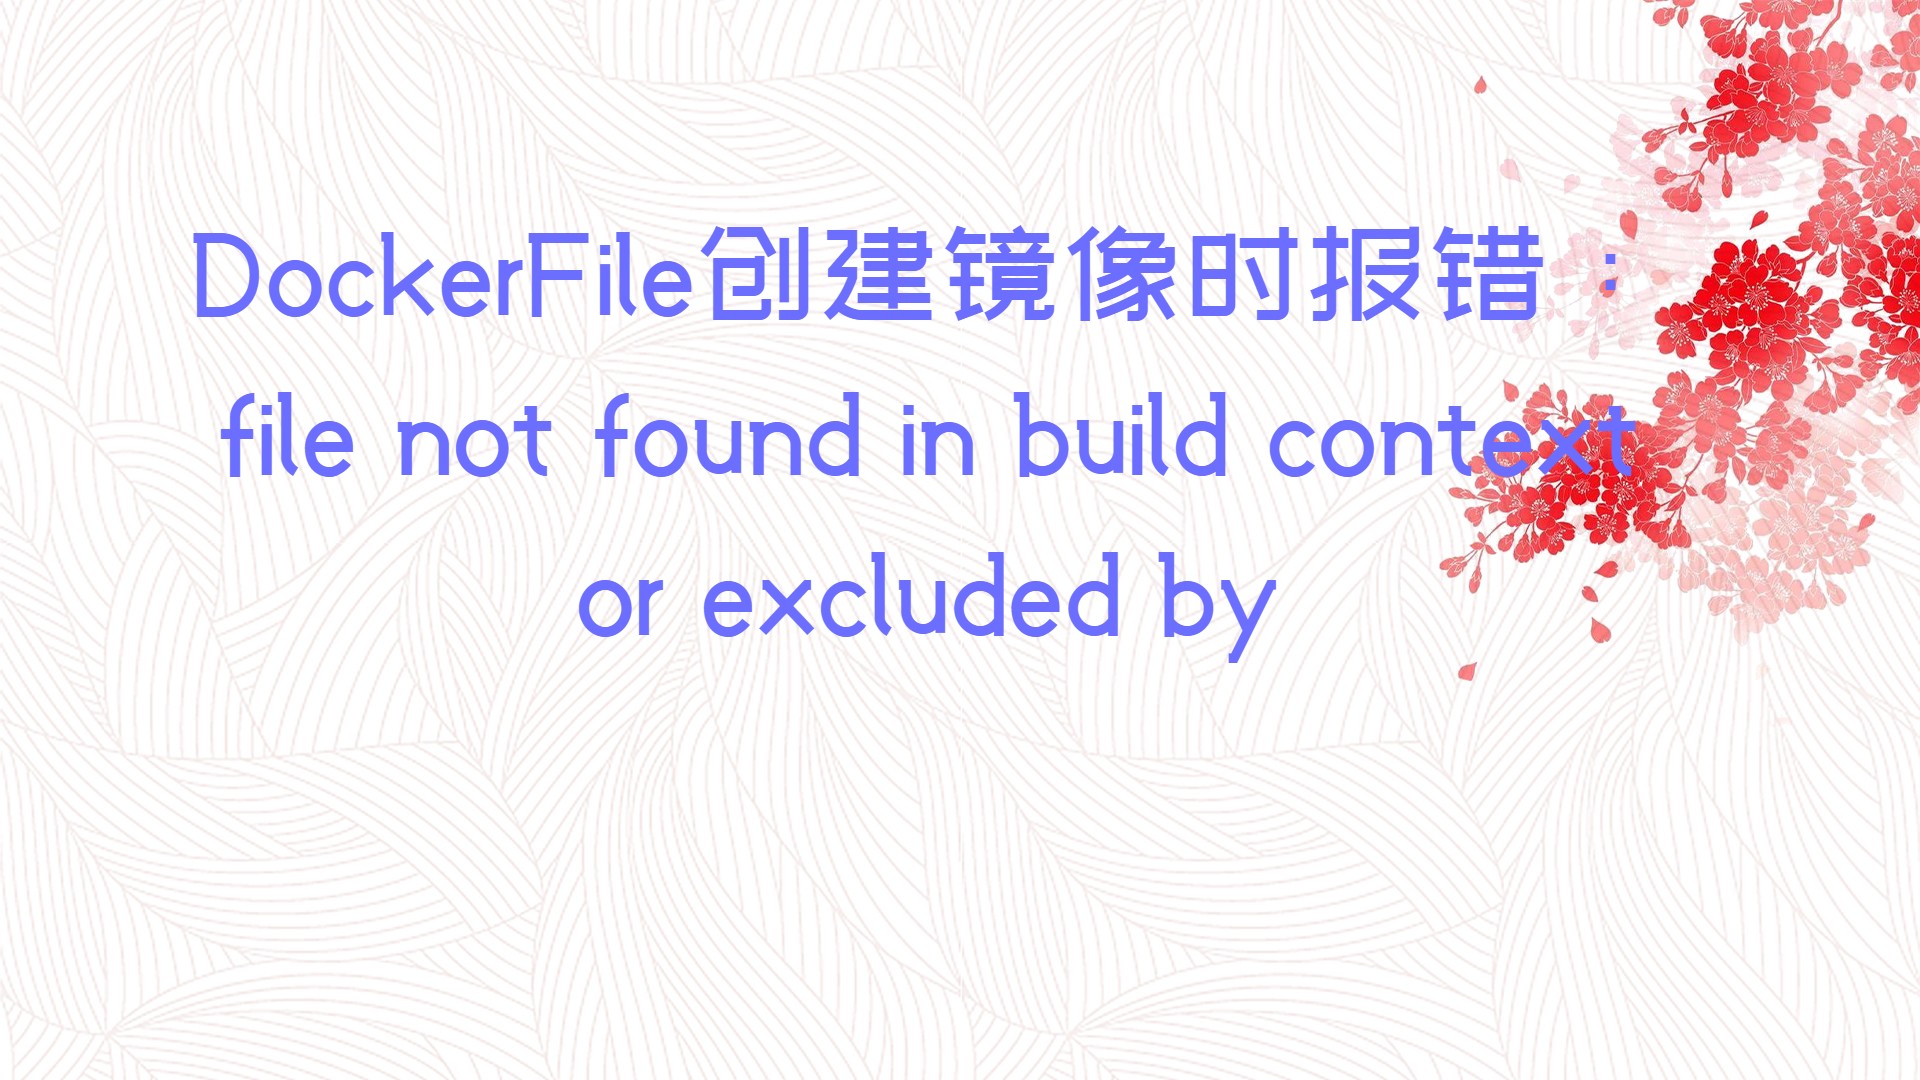 DockerFile创建镜像时报错：file not found in build context or excluded by